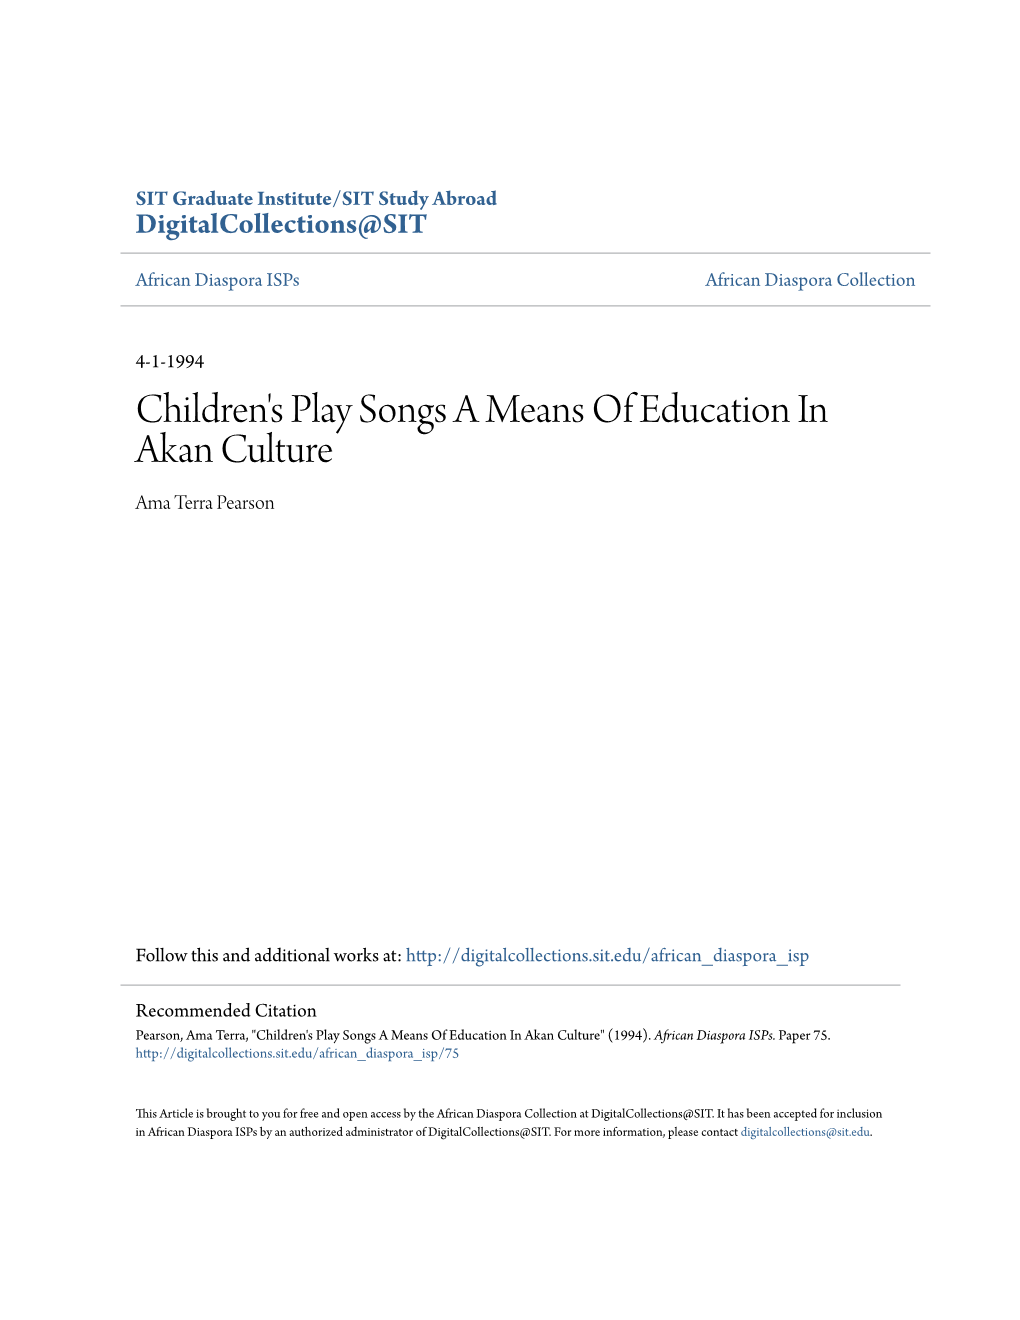 Children's Play Songs a Means of Education in Akan Culture Ama Terra Pearson